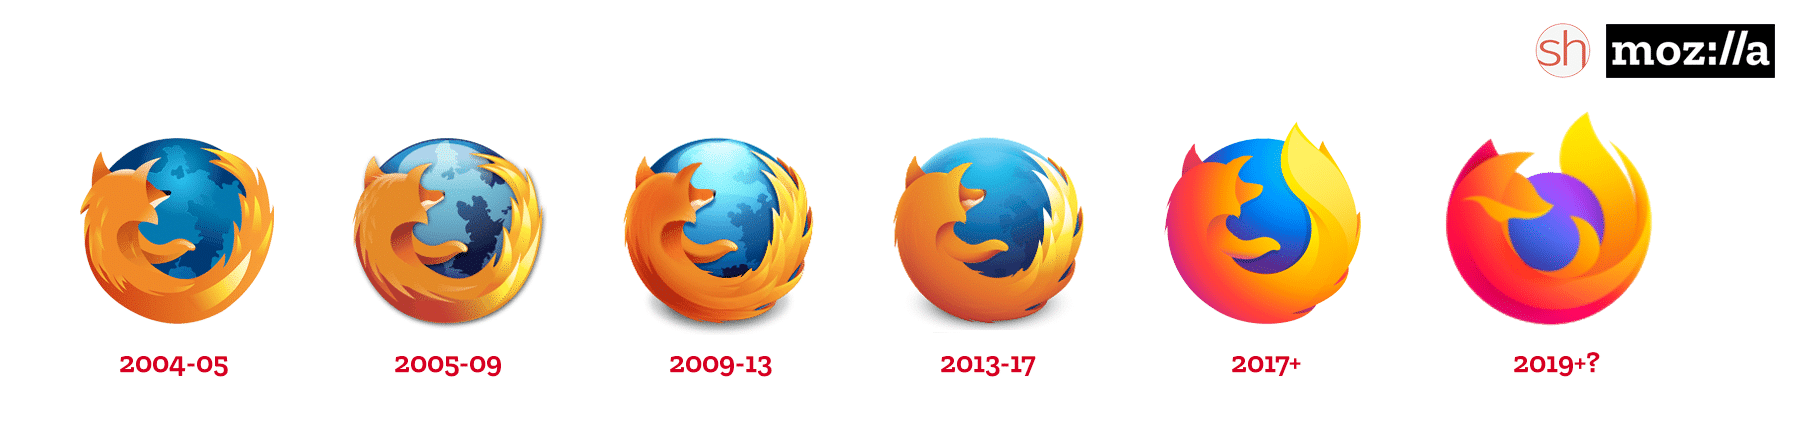 New Firefox Logo Live On Most Mozilla Services Except The Main Firefox Site Firefox